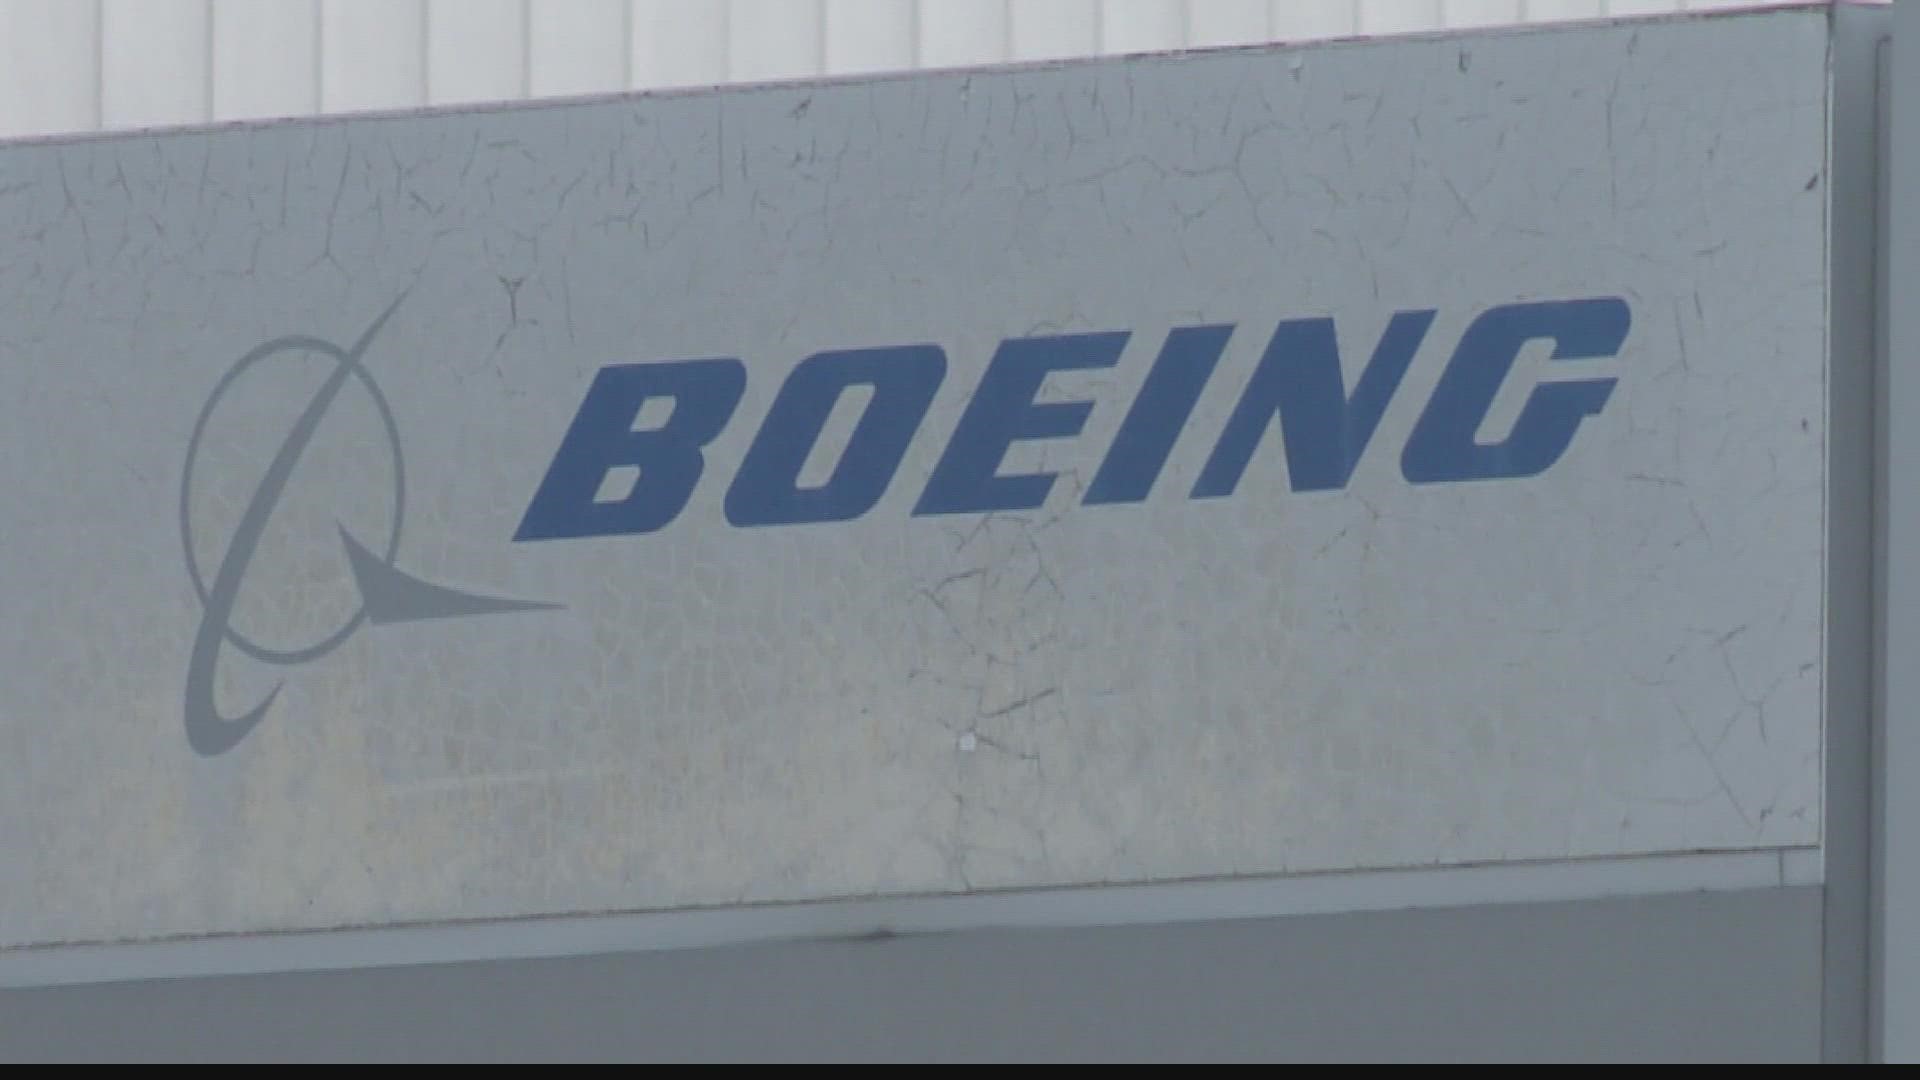 Boeing reported a $3.3 billion loss for the third quarter because of higher costs related to several government programs, including building new Air Force One jets.